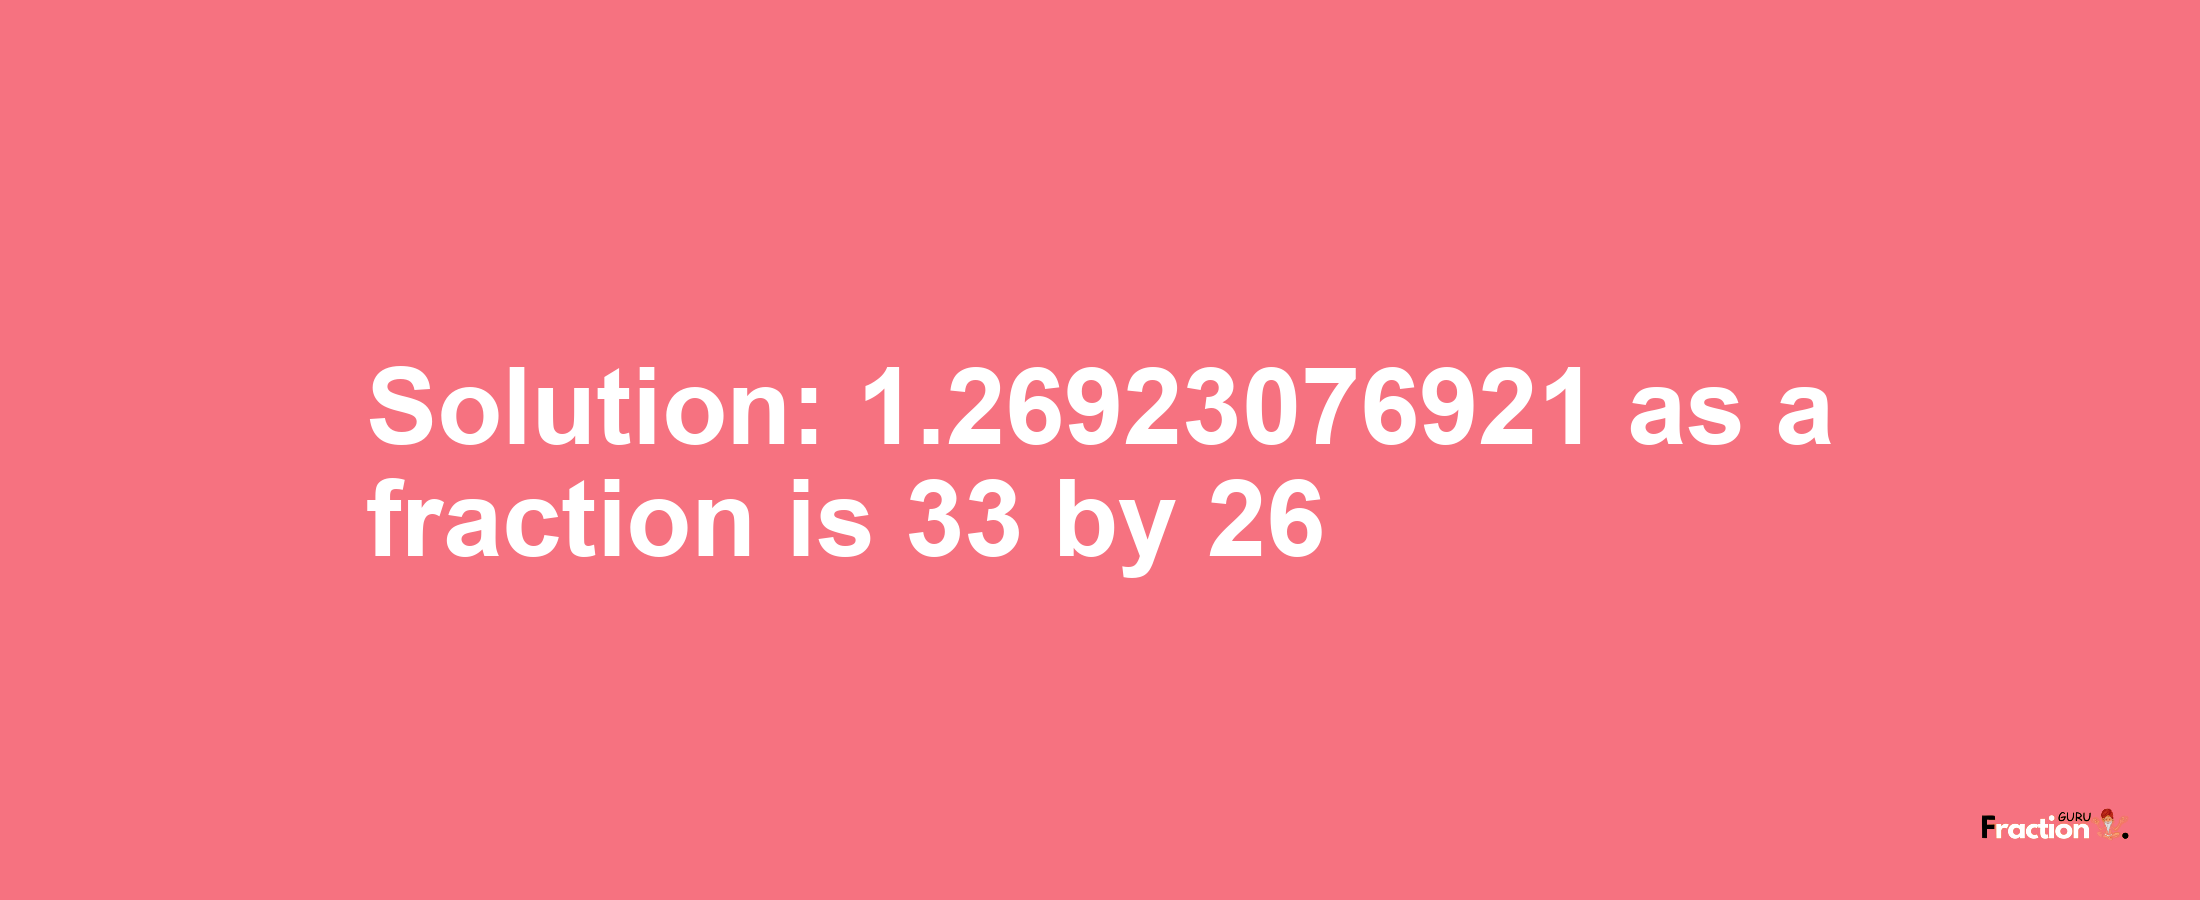 Solution:1.26923076921 as a fraction is 33/26